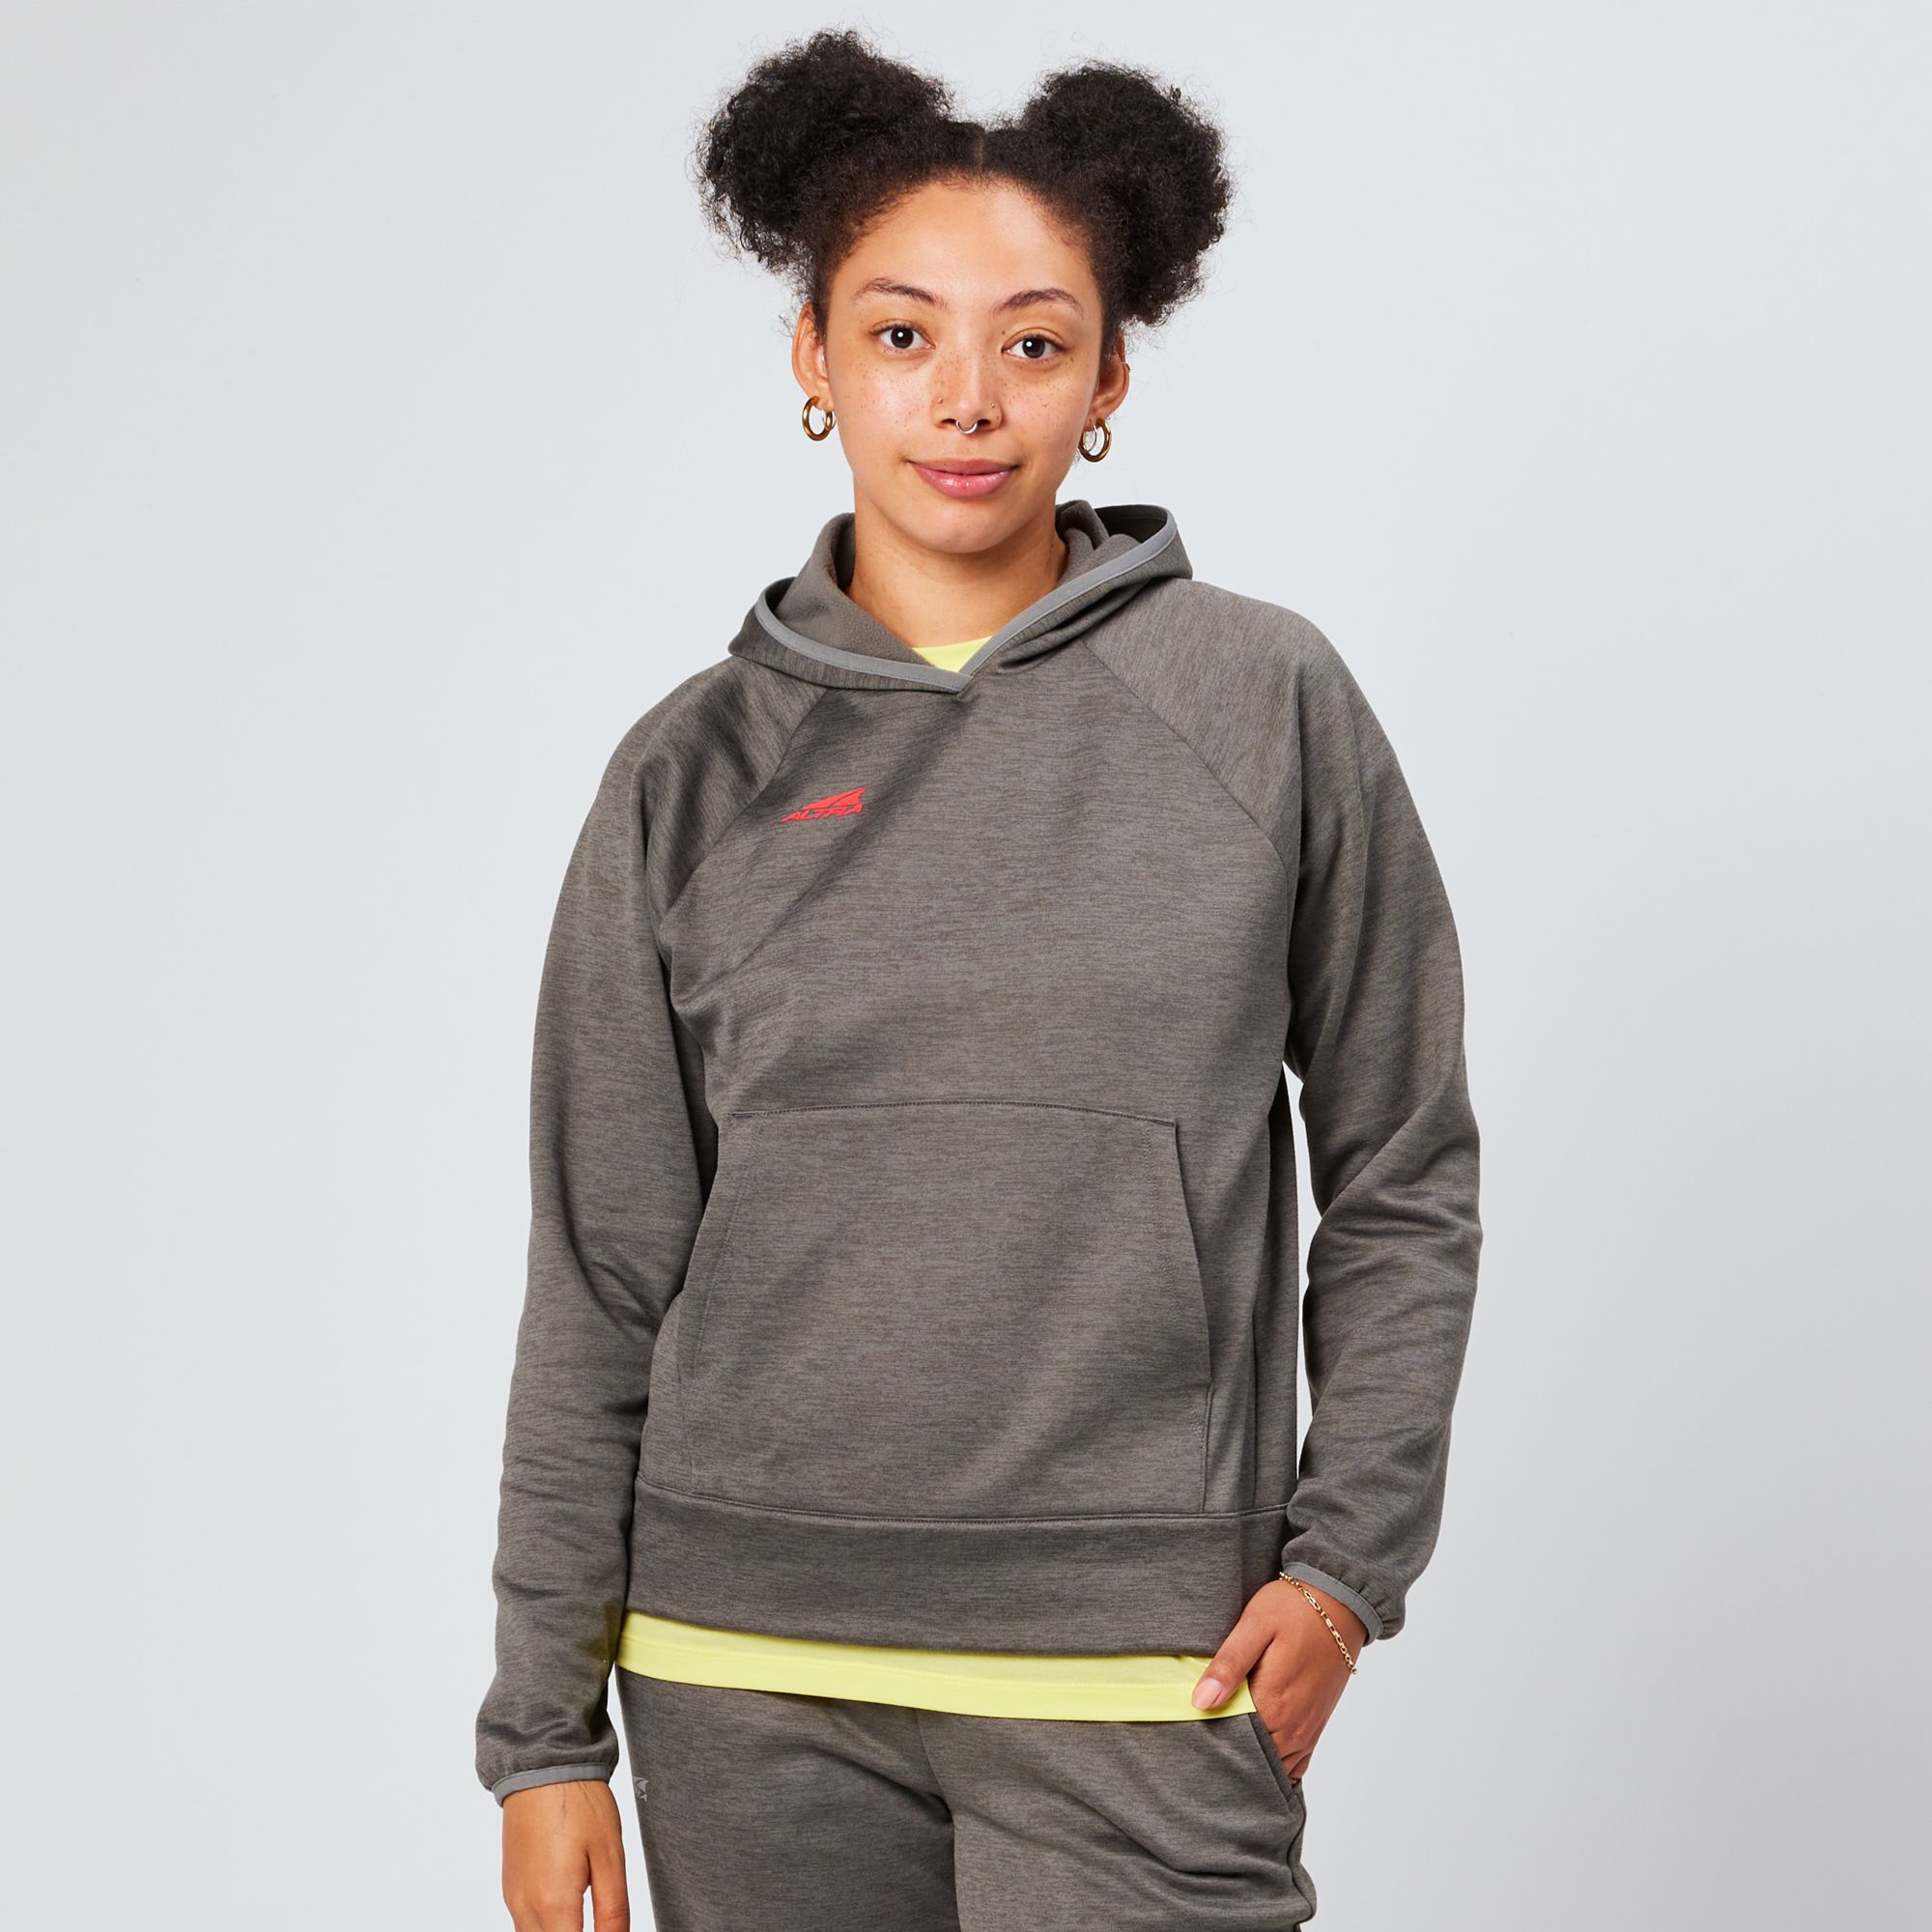 Women’s Run Without Rules Hoodie | Altra Running Apparel